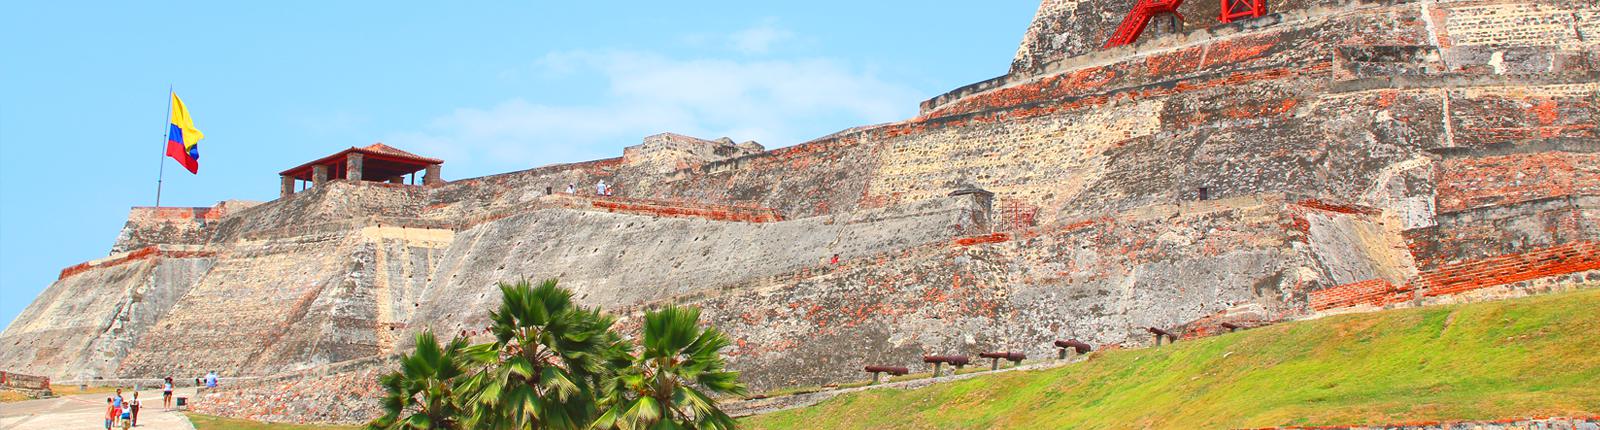 Close up view of the Castillo San Felipe fortress in Cartagena, Colombia